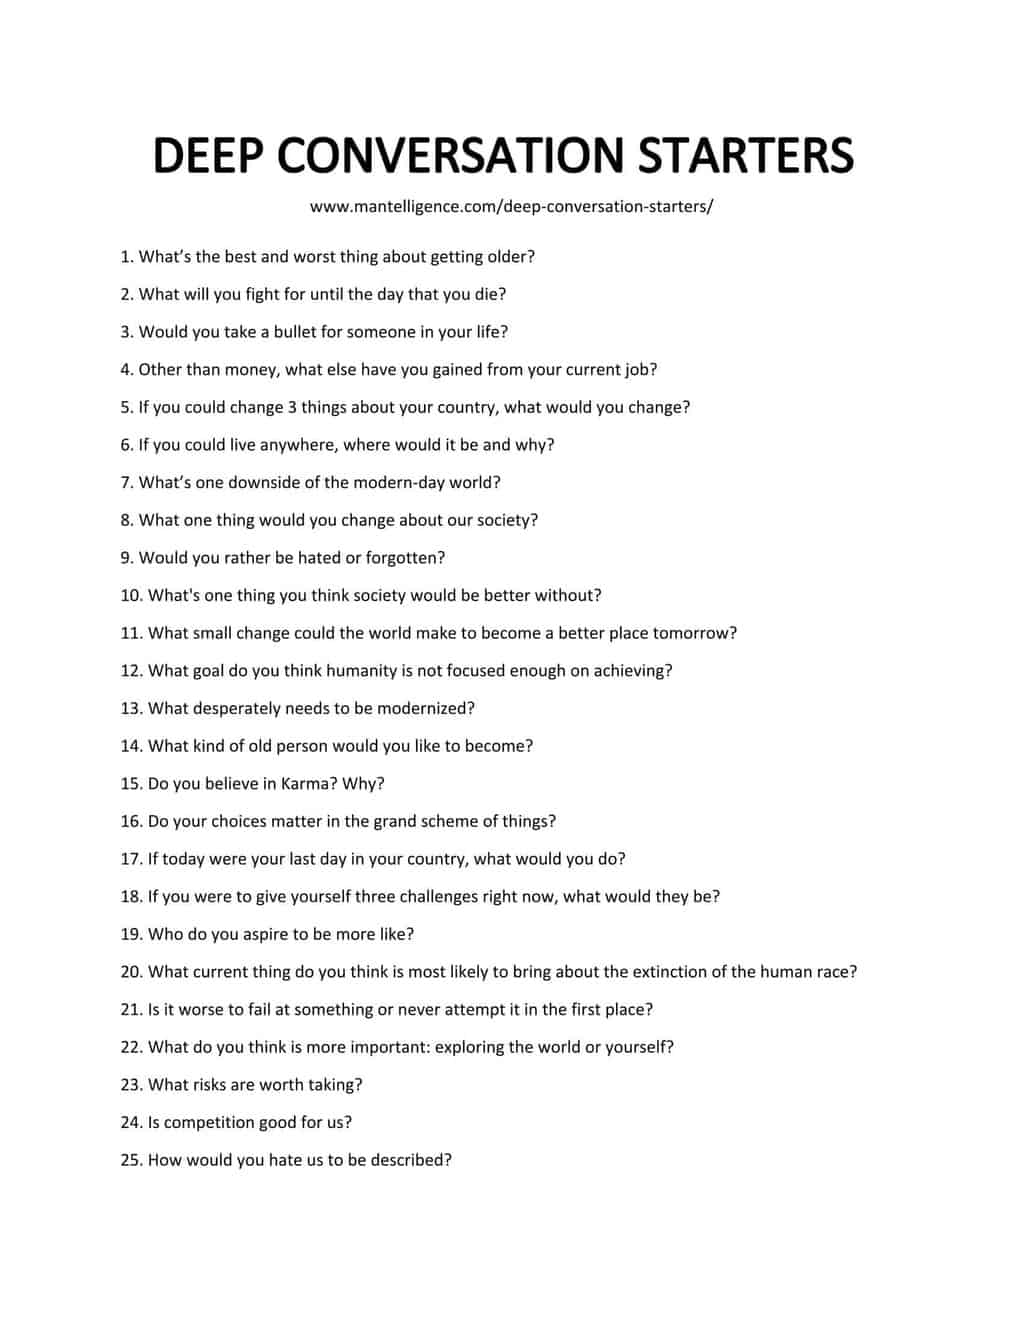 Downloadable and Printable List of Deep Conversation Starters